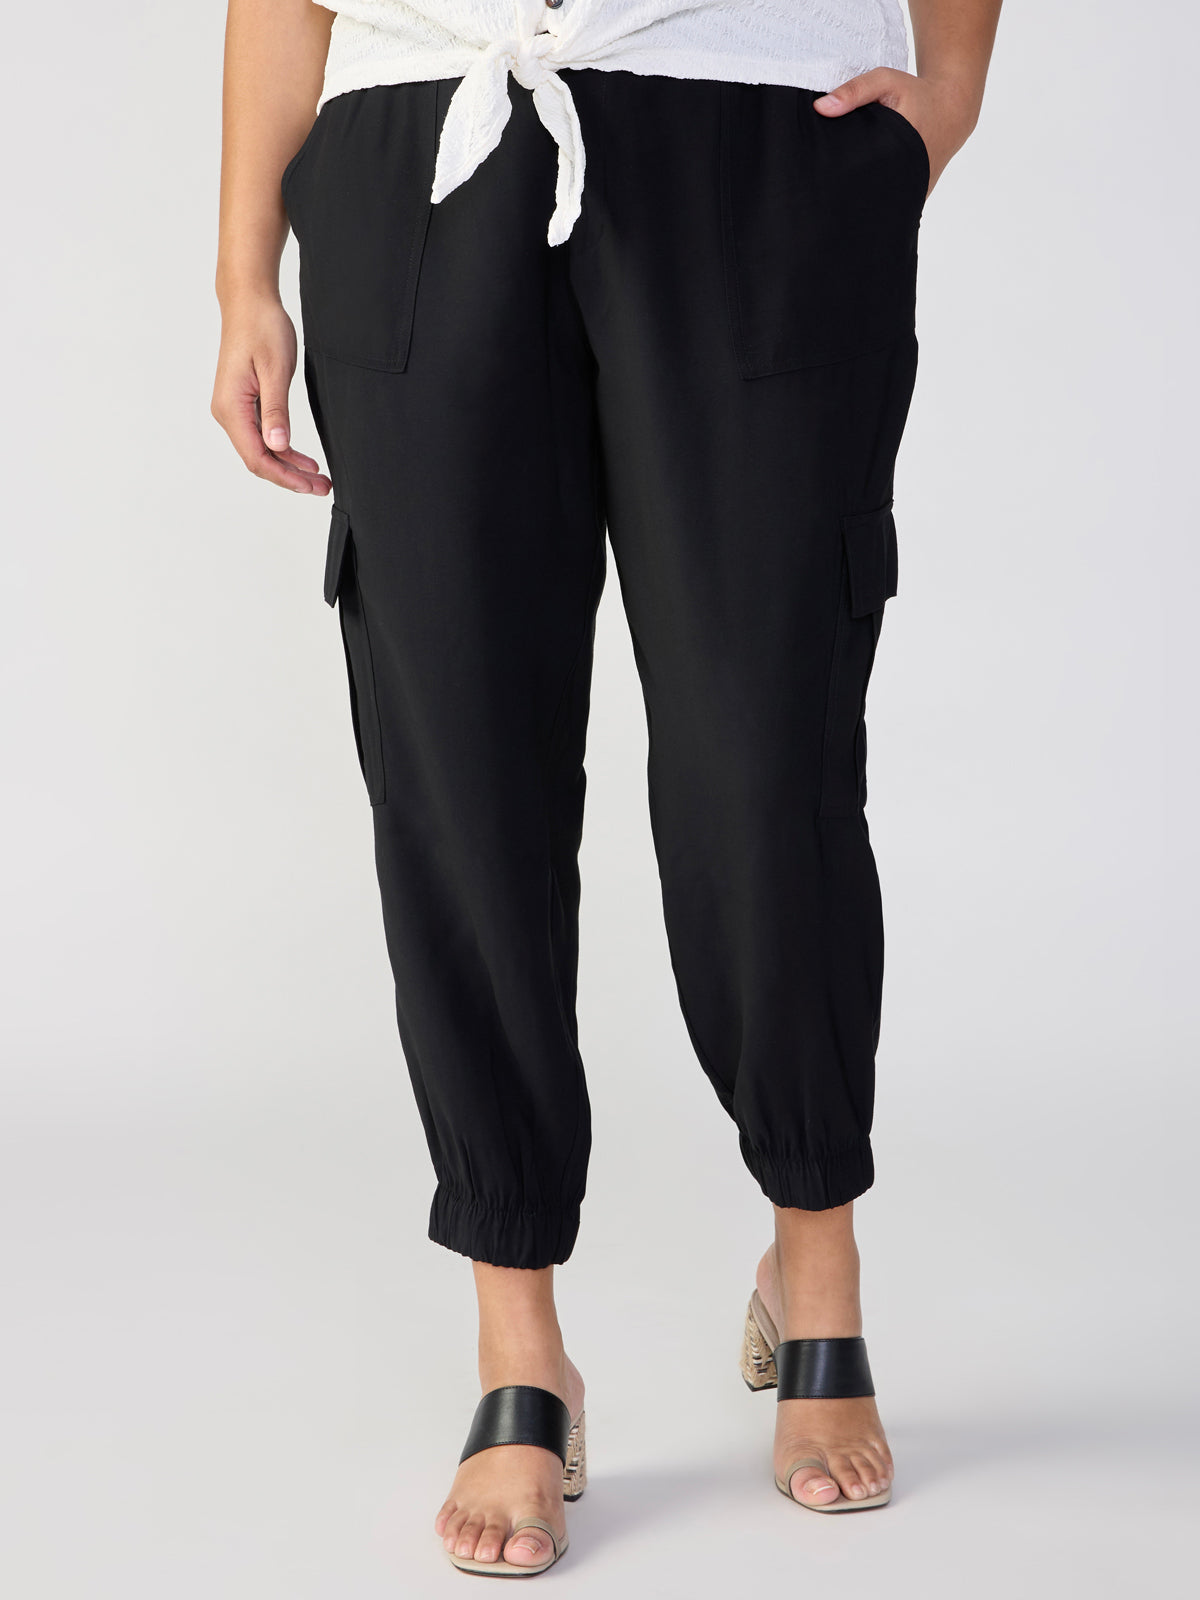 The Harmony Semi High Rise Pant Black Inclusive Collection